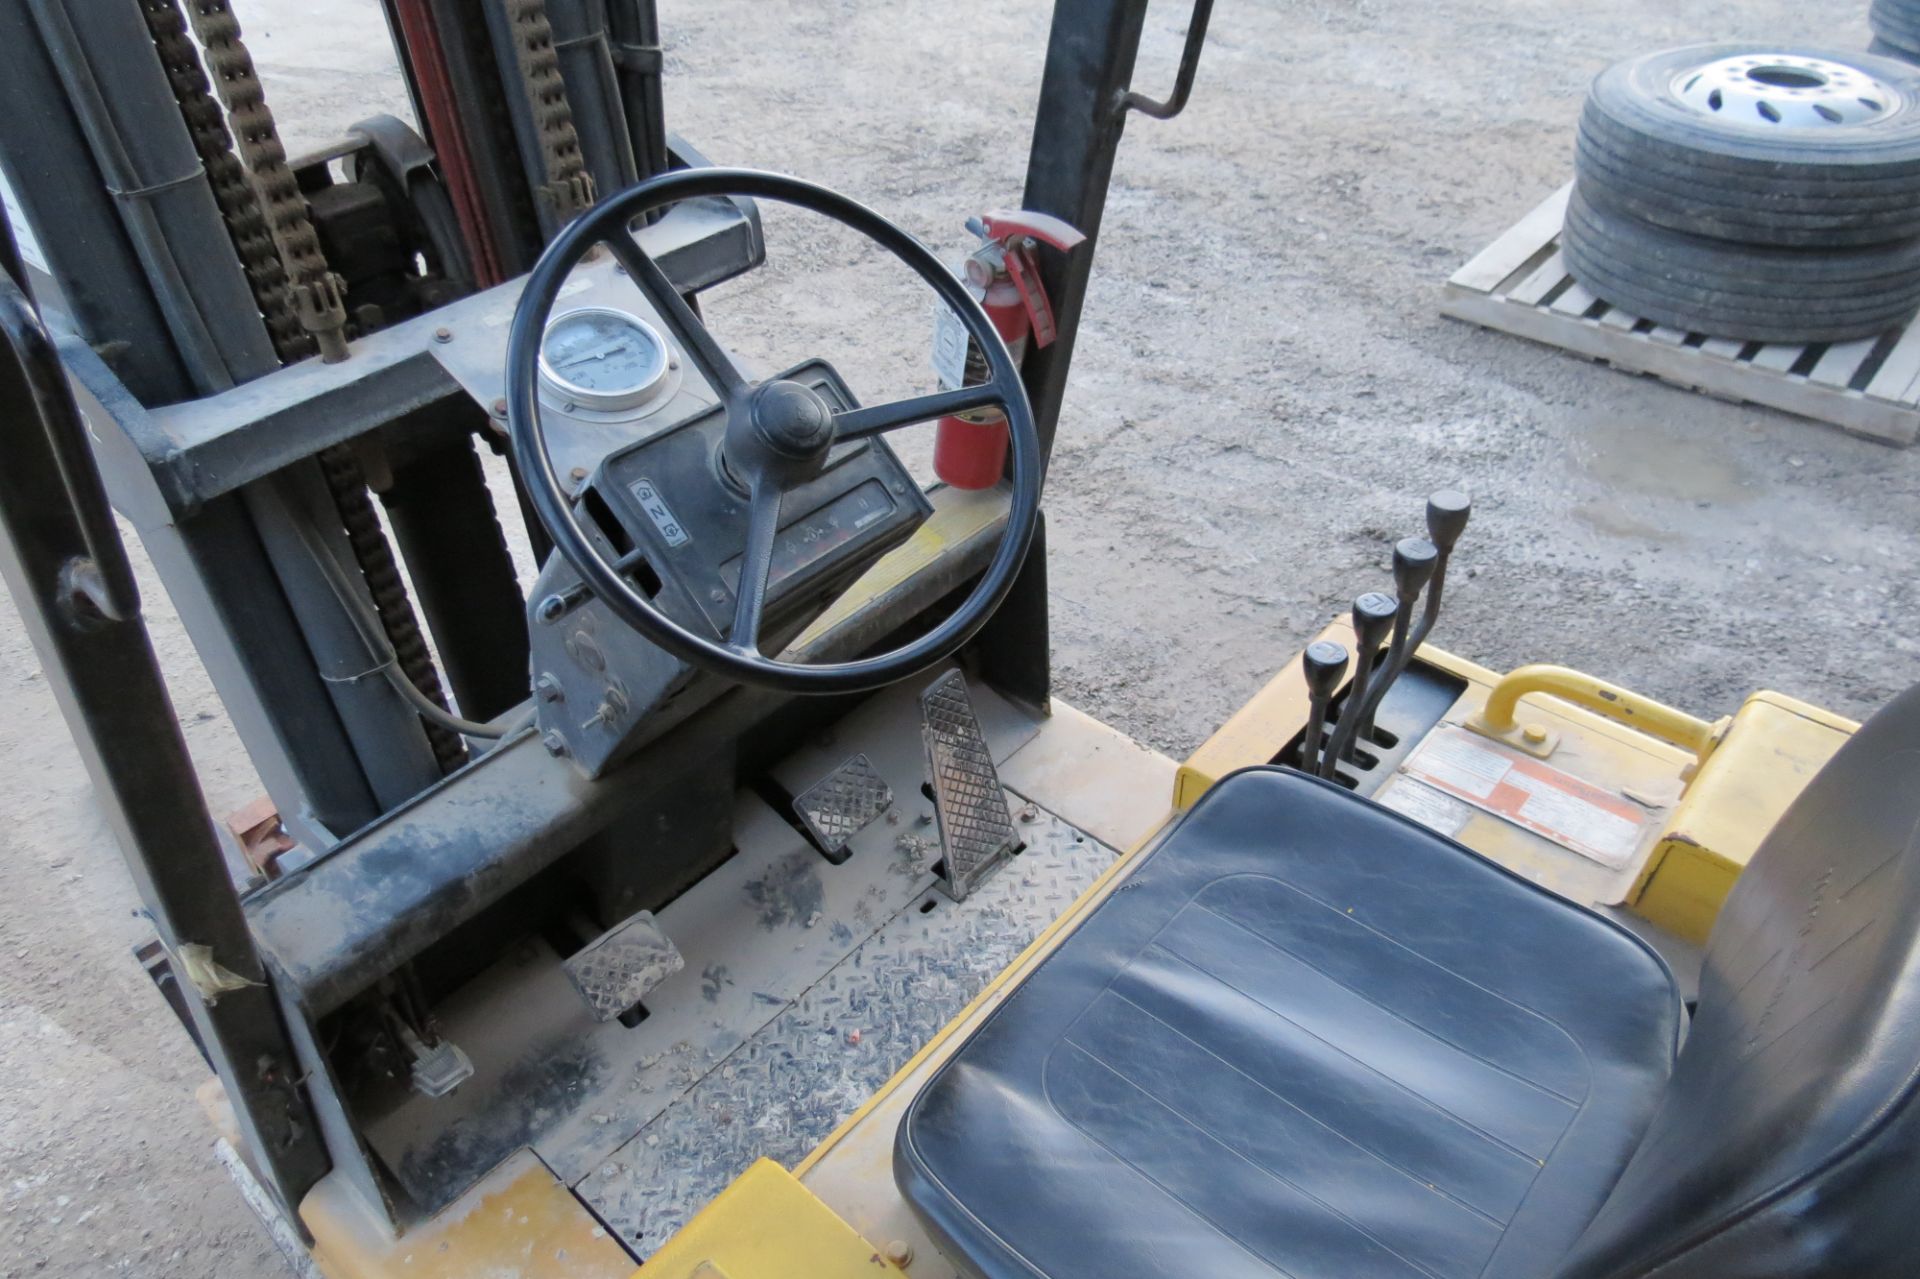 Cat GC25 forklift, 5000 lb cap, 3 stage mast, solid tires, LP, sideshift, sells with LP tank - Image 10 of 10